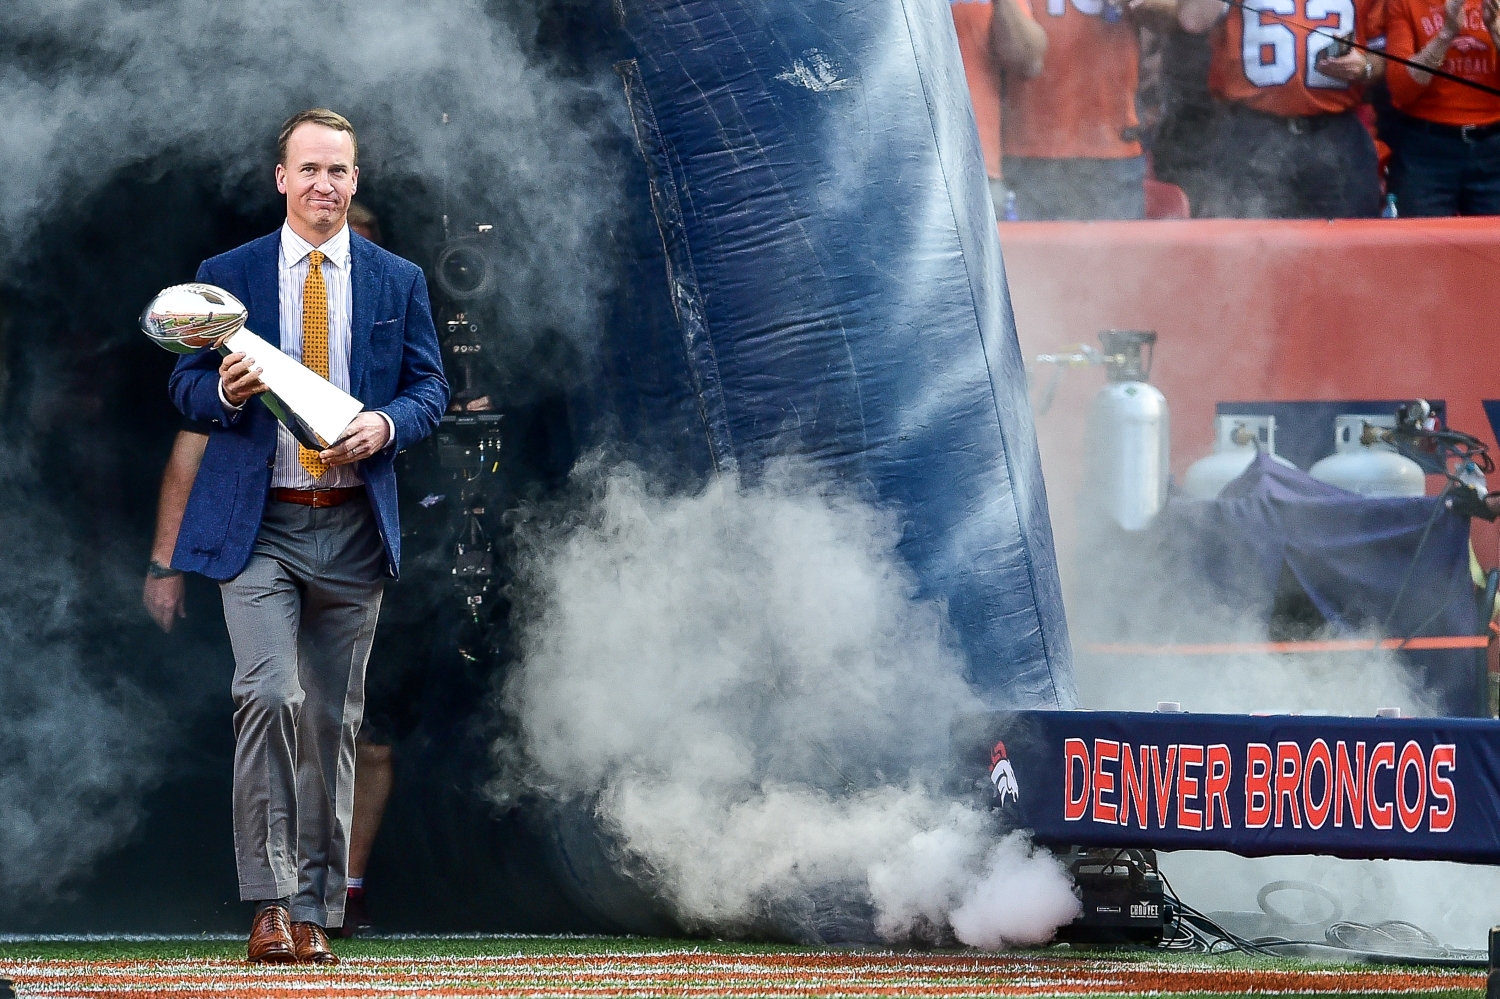 Peyton Manning walks onto the field holding the Lombardi Trophy.